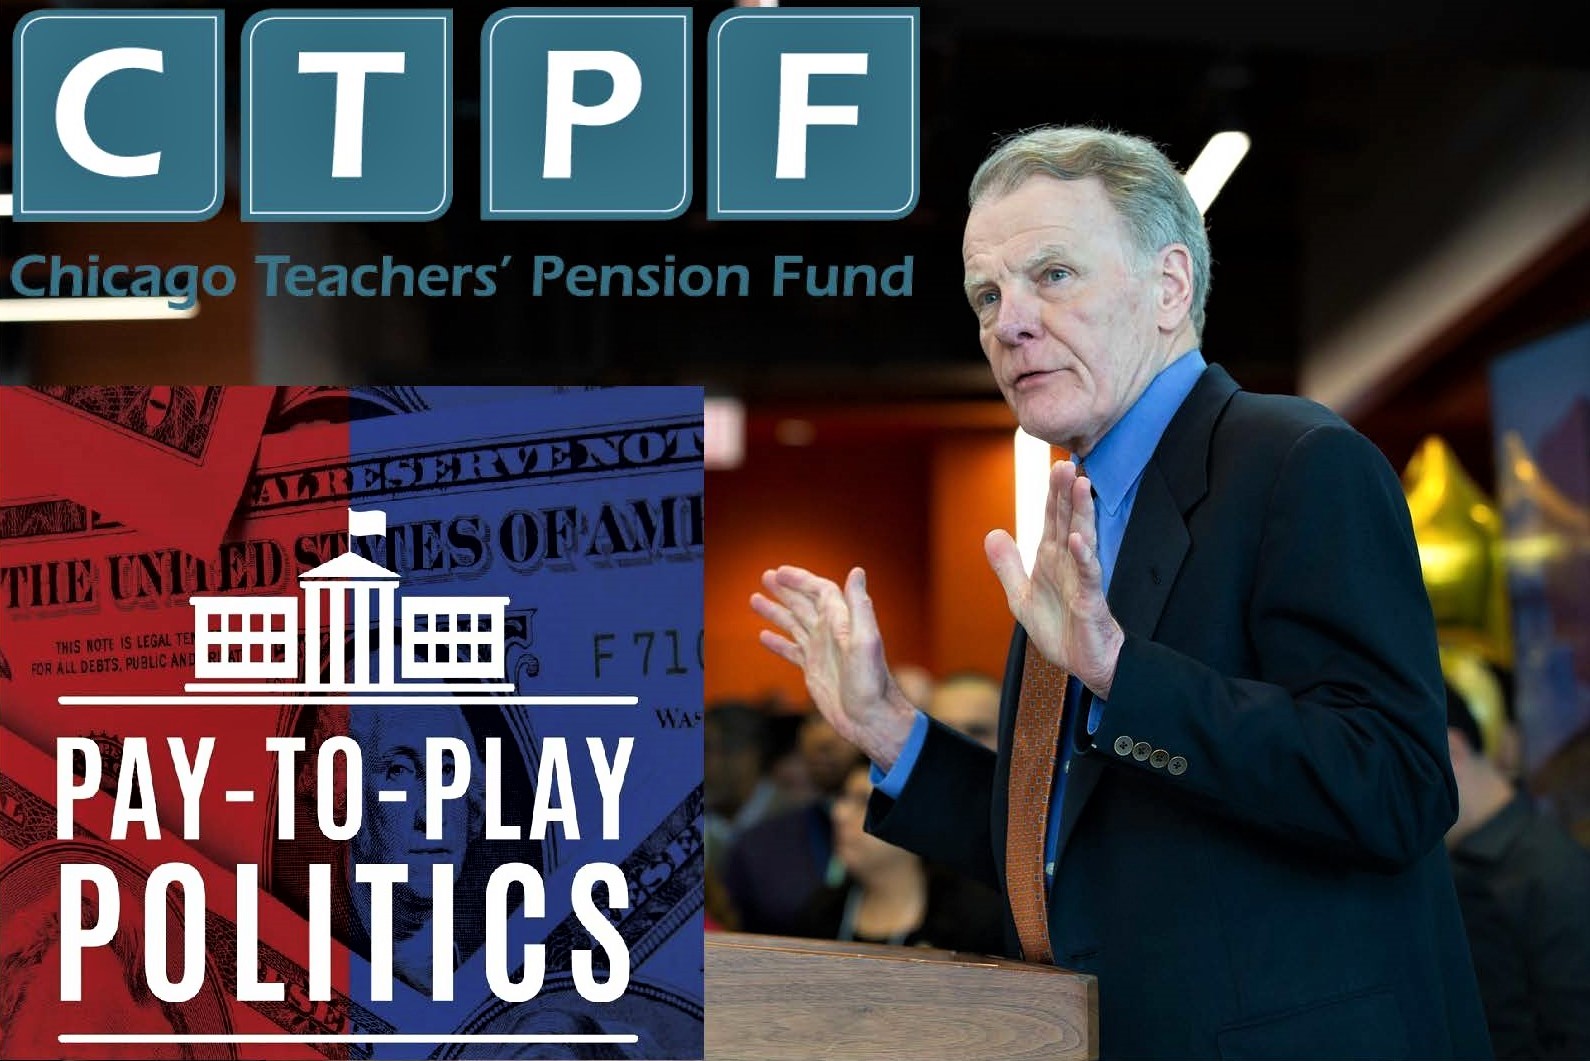 “I am also aware of trustees being approached by members of the Chicago Teachers Union who want us as trustees to hire former Madigan staffers who are now contract lobbyists,” Jeffery Blackwell, president of the Chicago Teachers’ Pension Fund Board of Trustees said. “Let me be clear. We are not in the business as fiduciaries of hiding Madigan lobbyists at the fund under the guise of a [request for proposal].”